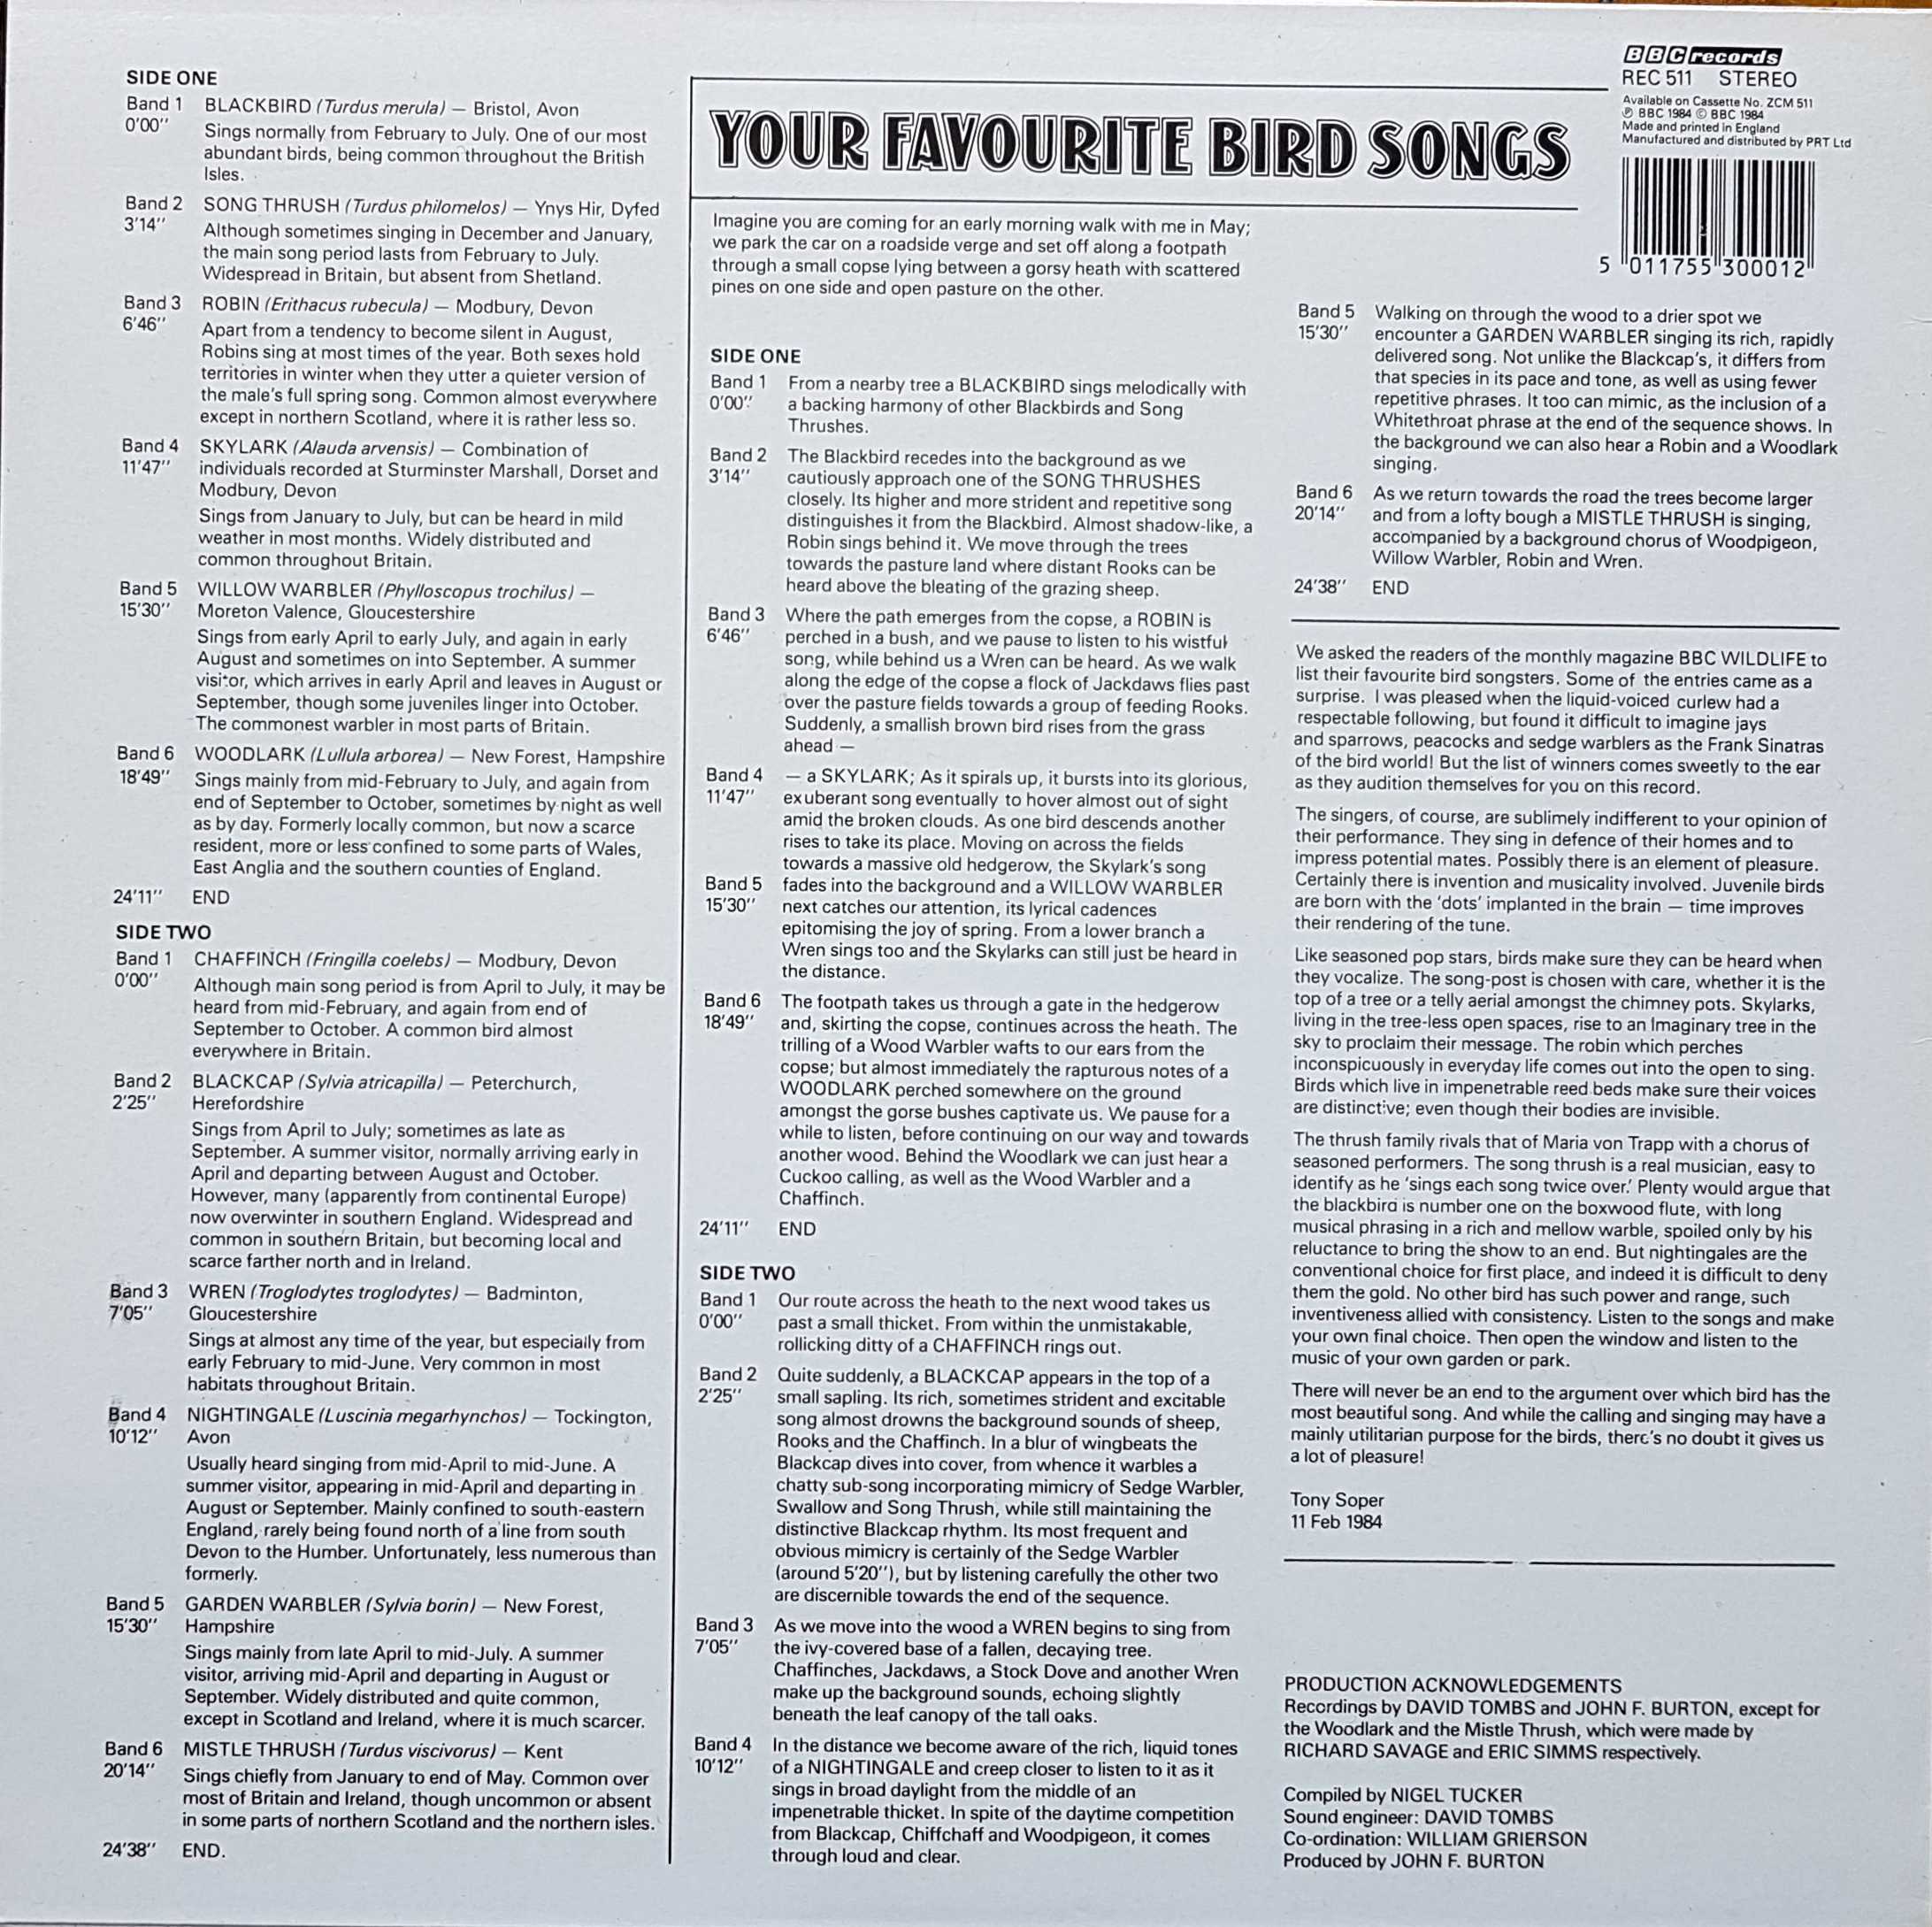 Picture of REC 511 Your favourite bird songs by artist Various from the BBC records and Tapes library